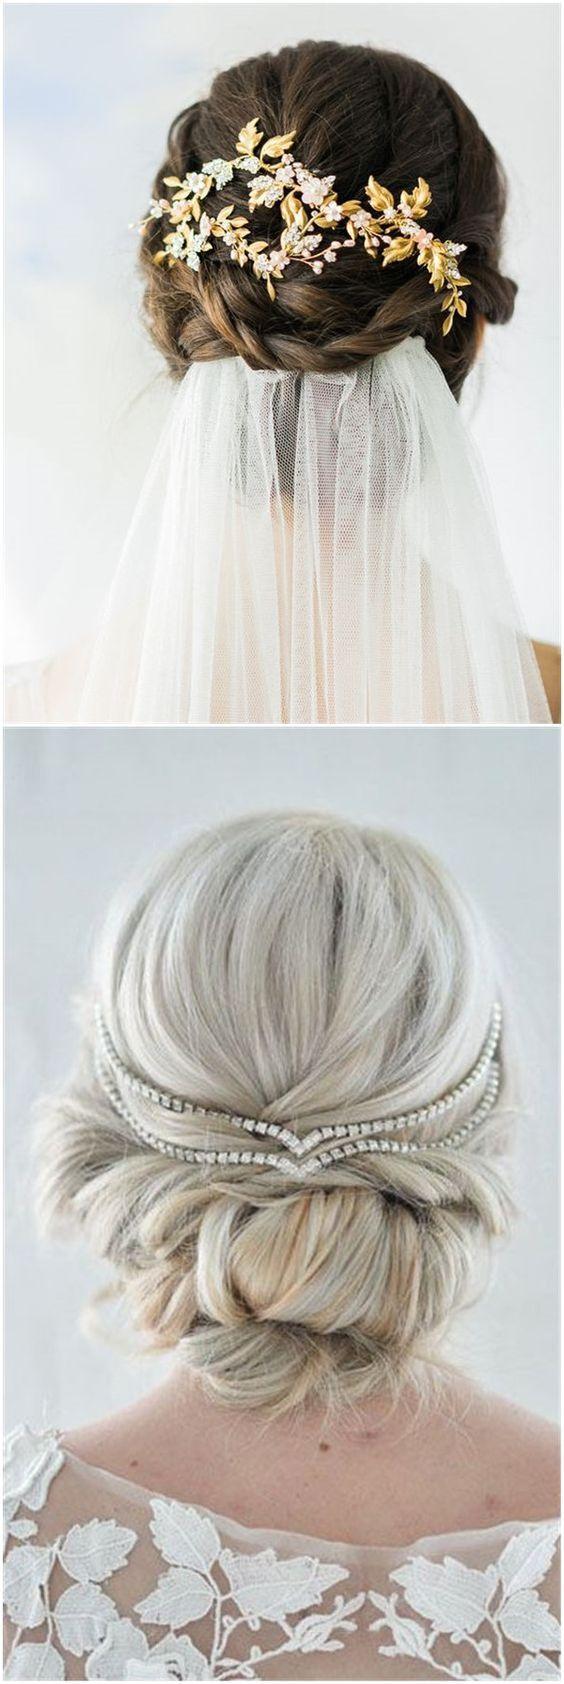 Wedding - Hair Comes The Bride - 20 Bridal Hair Accessories Get Style Advice For Any Budget